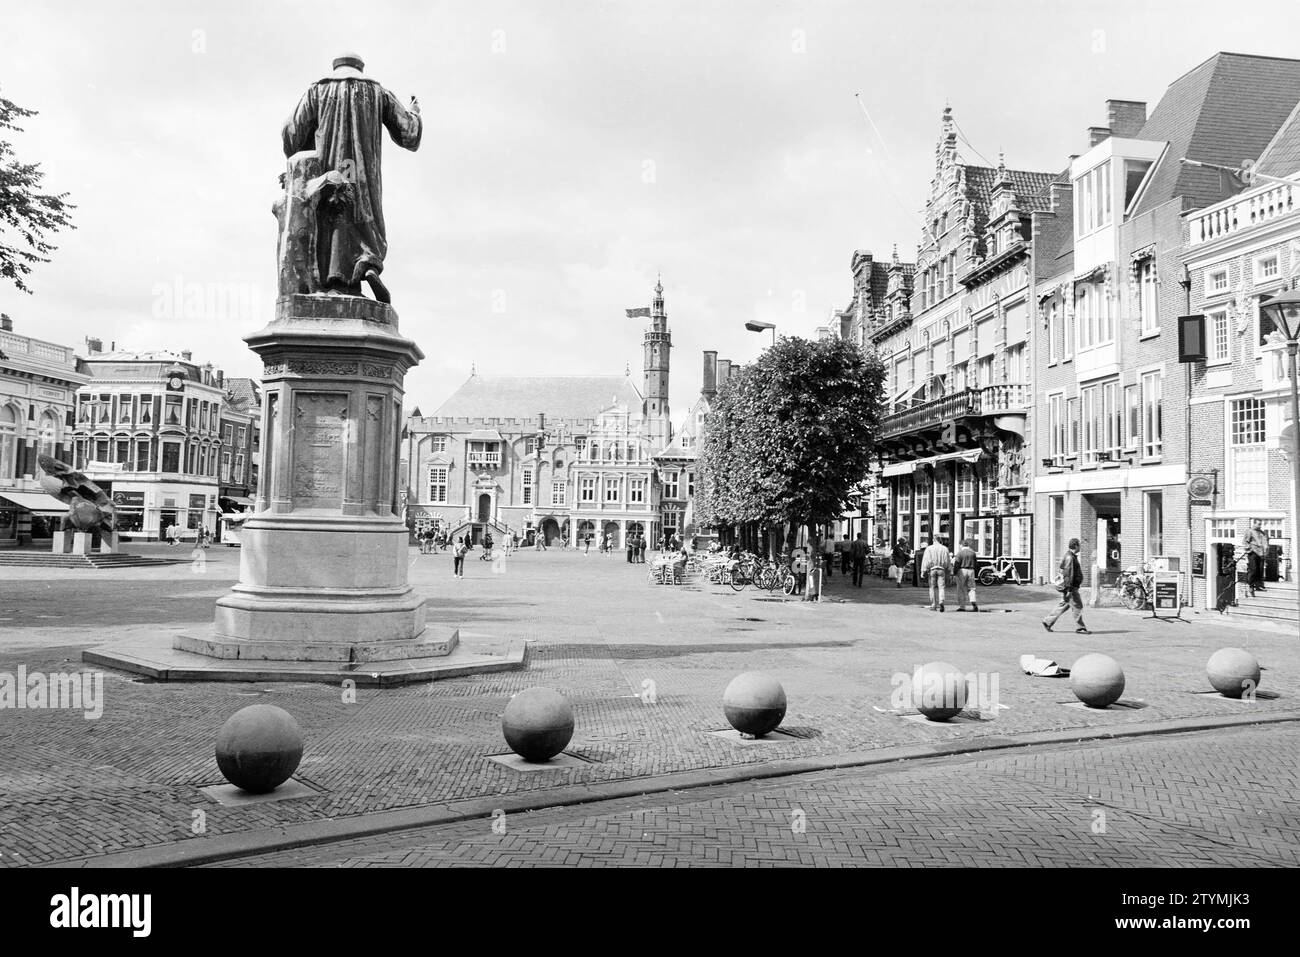 Grote Markt in Haarlem with the statue of Laurens Janszoon Coster, straight ahead the town hall (number 2), behind the trees the De Kroon building (number 13) and on the far right the Hoofdwacht (number 17).., Haarlem, Grote Markt, The Netherlands, 28-08-1995, Whizgle News from the Past, Tailored for the Future. Explore historical narratives, Dutch The Netherlands agency image with a modern perspective, bridging the gap between yesterday's events and tomorrow's insights. A timeless journey shaping the stories that shape our future. Stock Photo